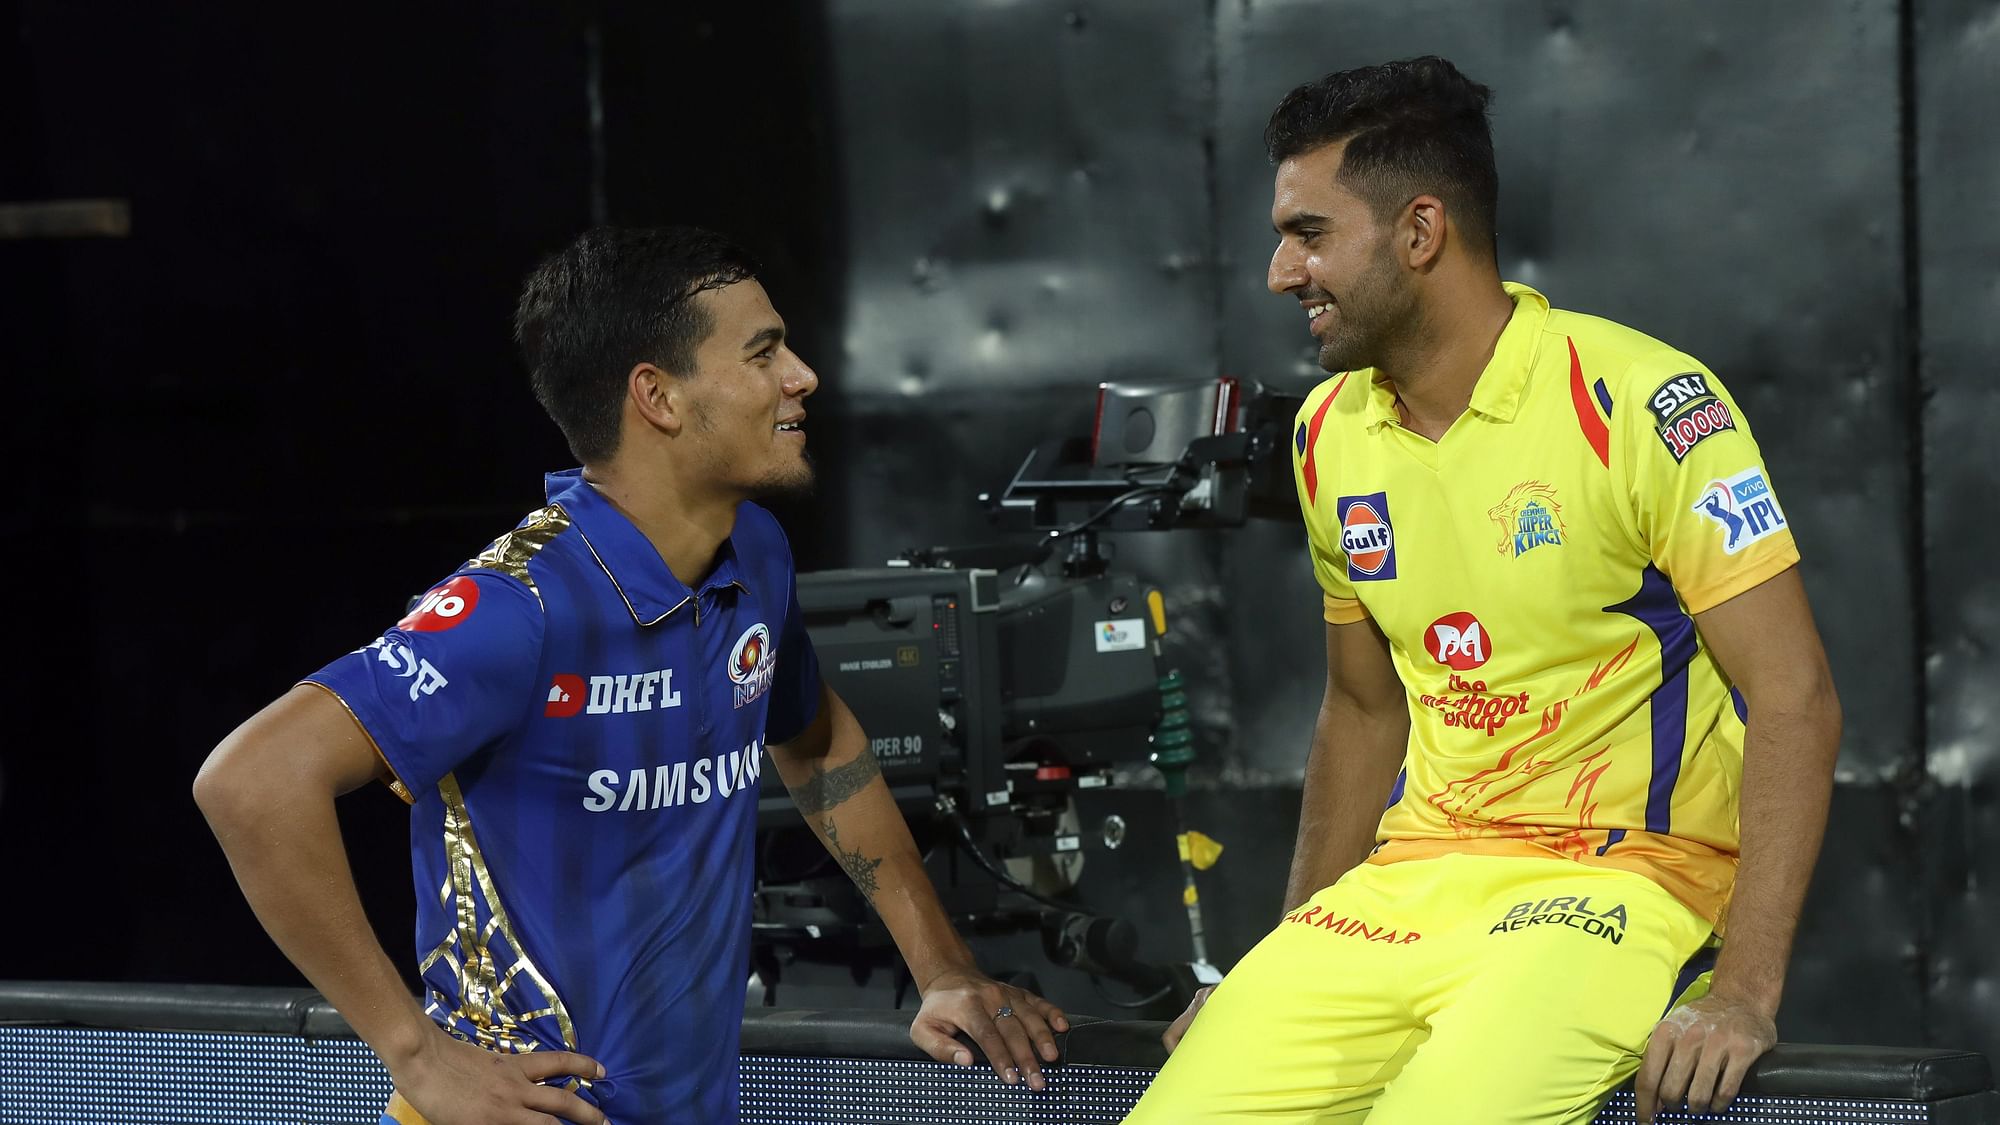 Cousins Deepak and Rahul Chahar have been impressive so far in the ongoing Indian Premier League.